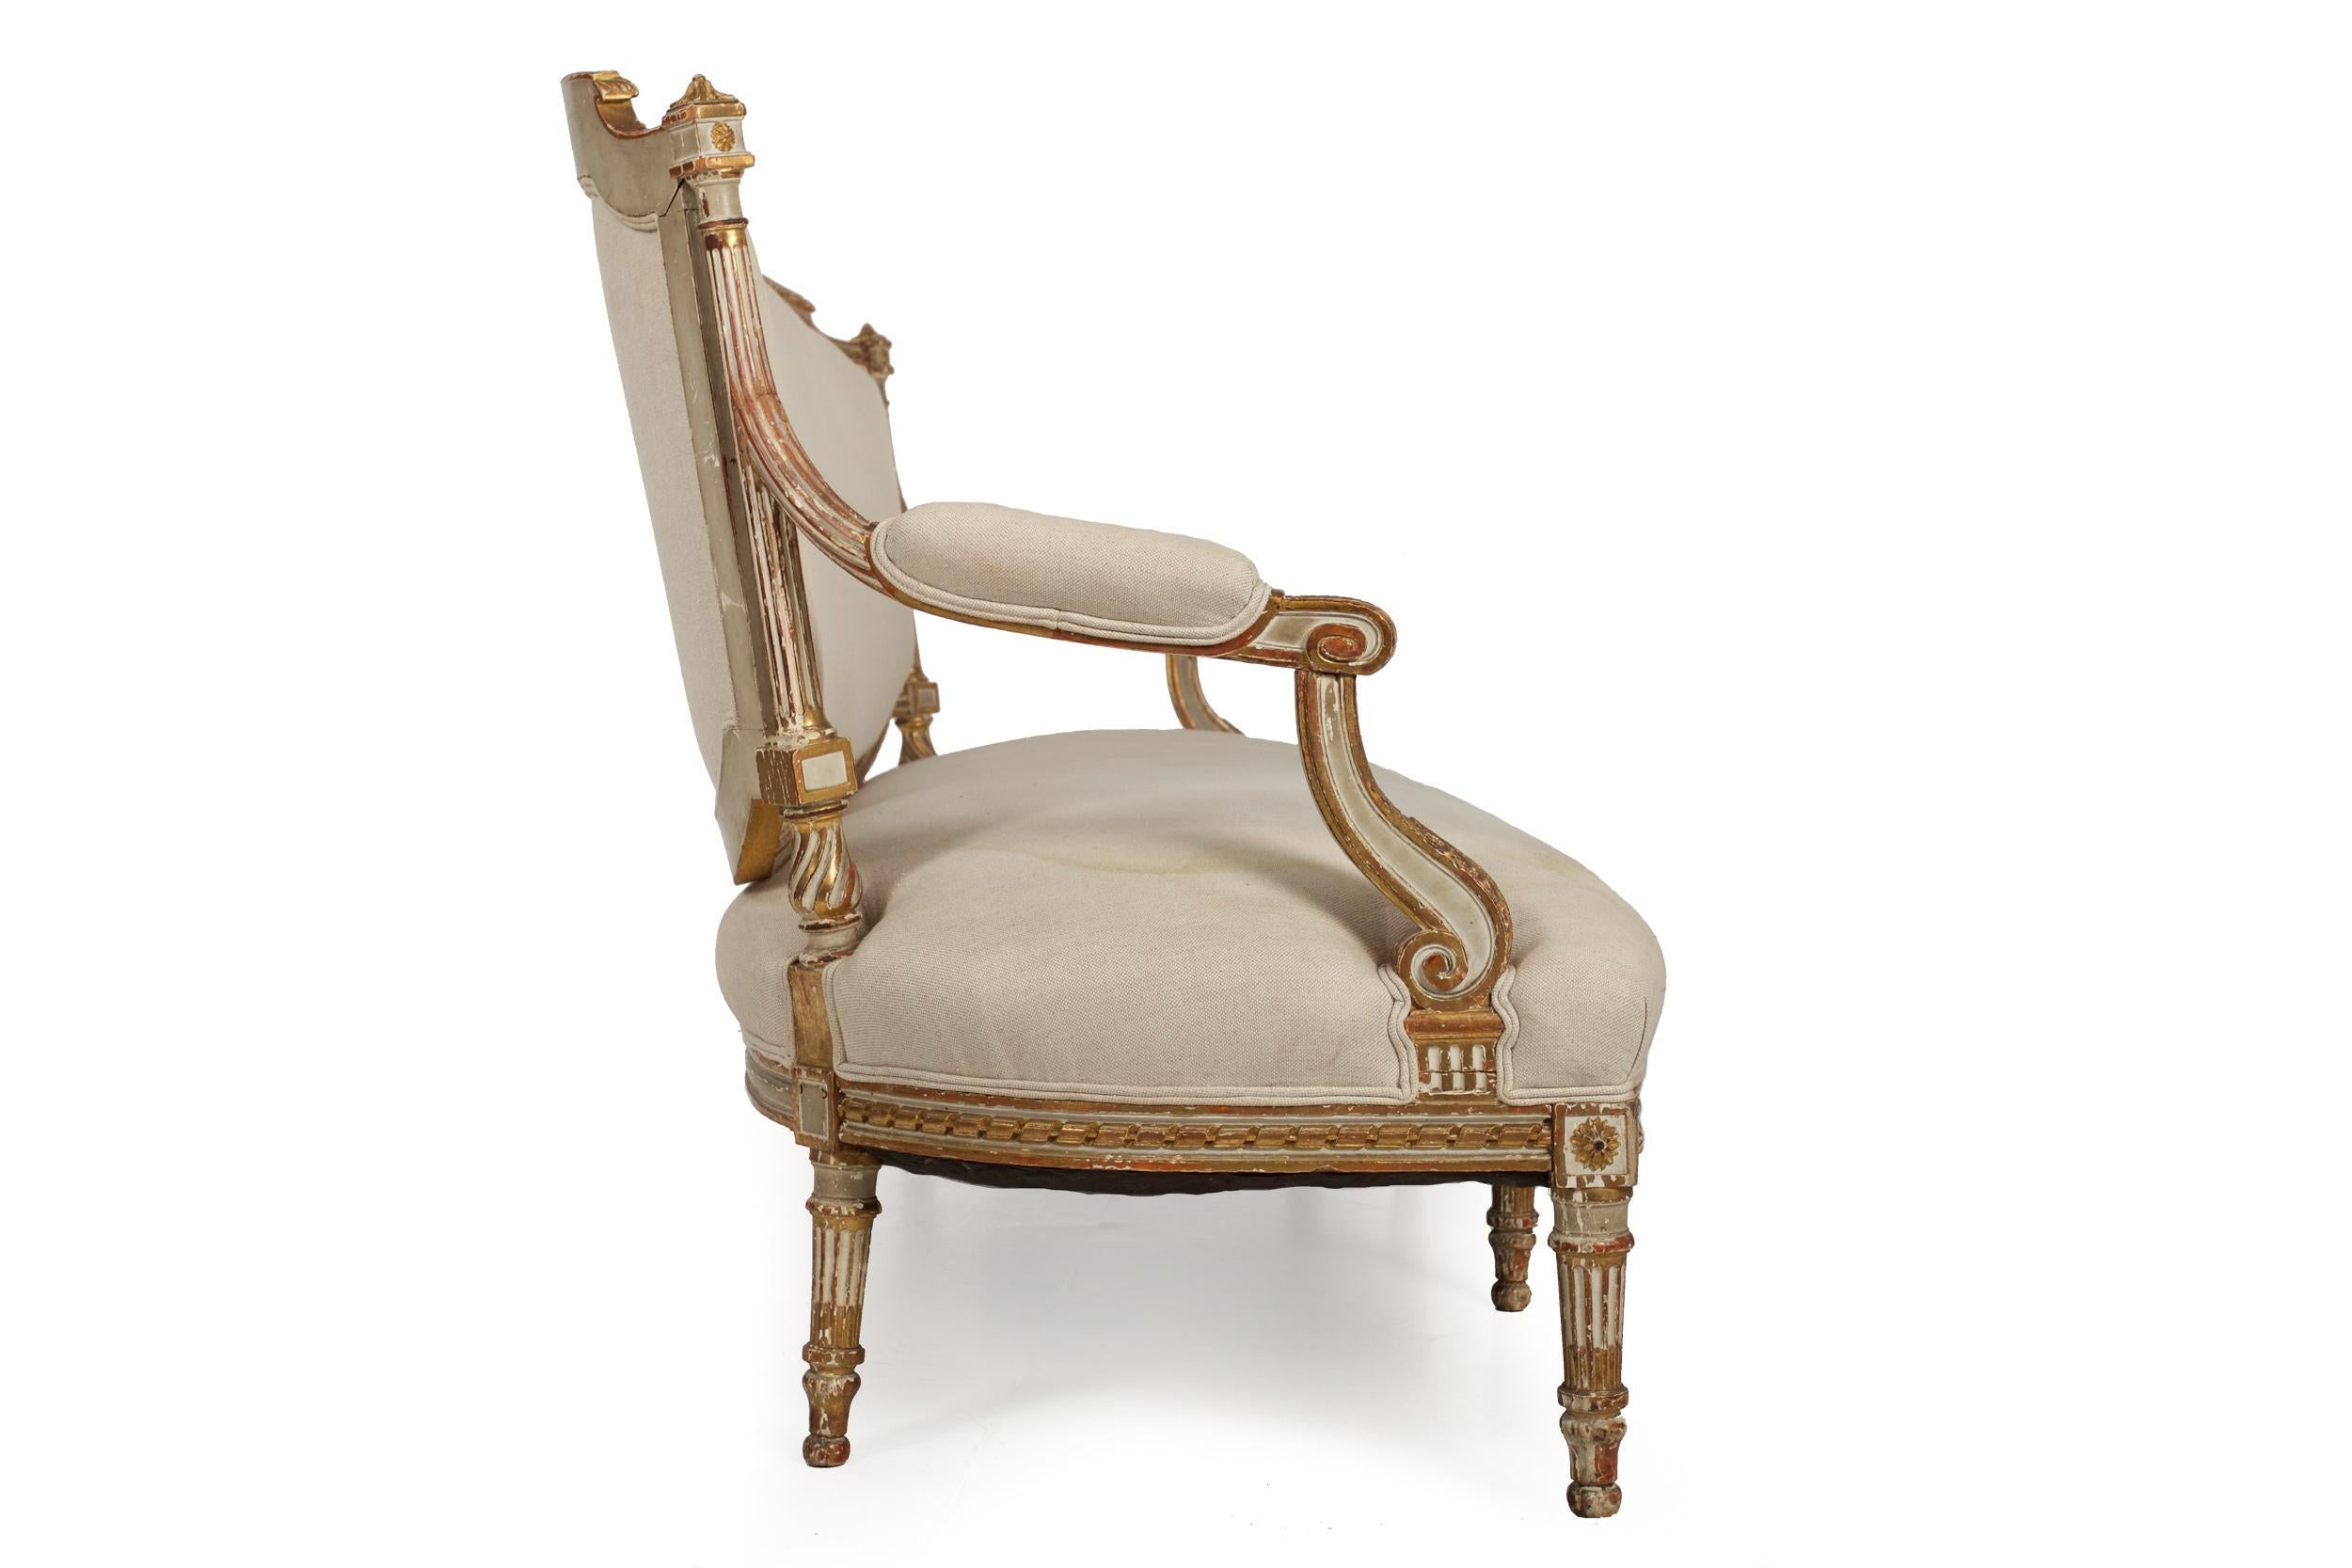 A good settee in the Louis XVI taste from the third-quarter of the nineteenth century, it exhibits an overall motif typical of the period: light angular acanthus foliage carvings, twisted-rope motifs surrounding both the seating and the seat-back,